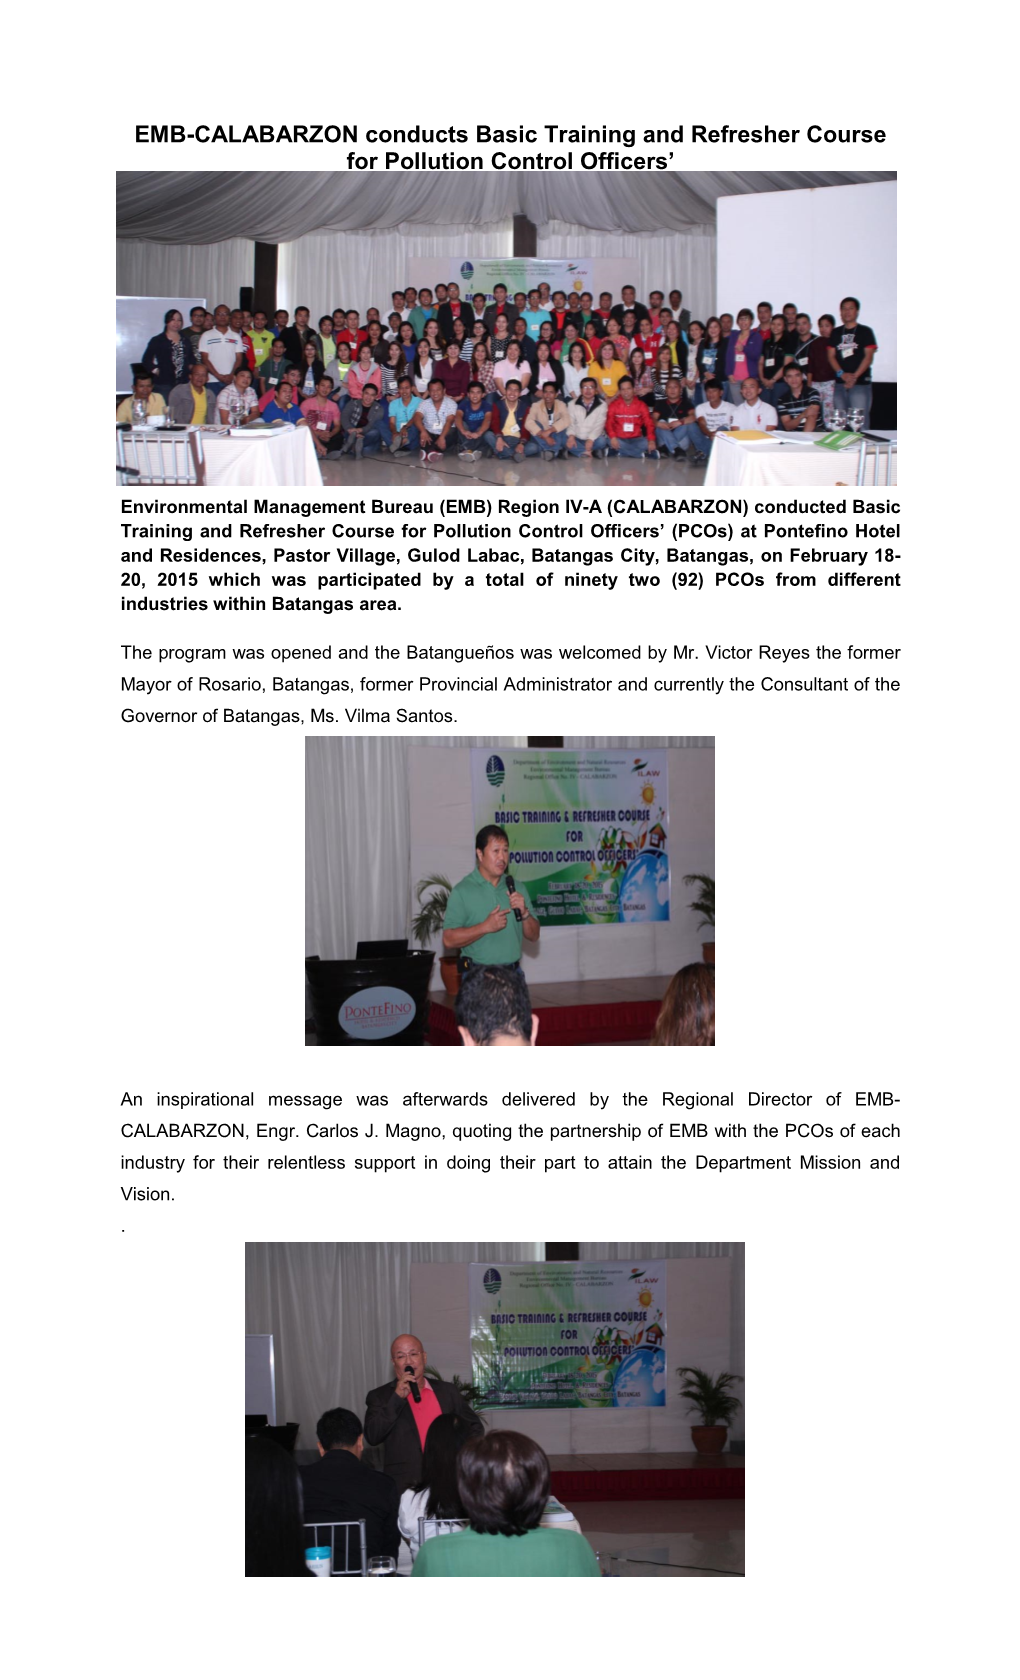 EMB-CALABARZON Conducts Basic Training and Refresher Course for Pollution Control Officers’